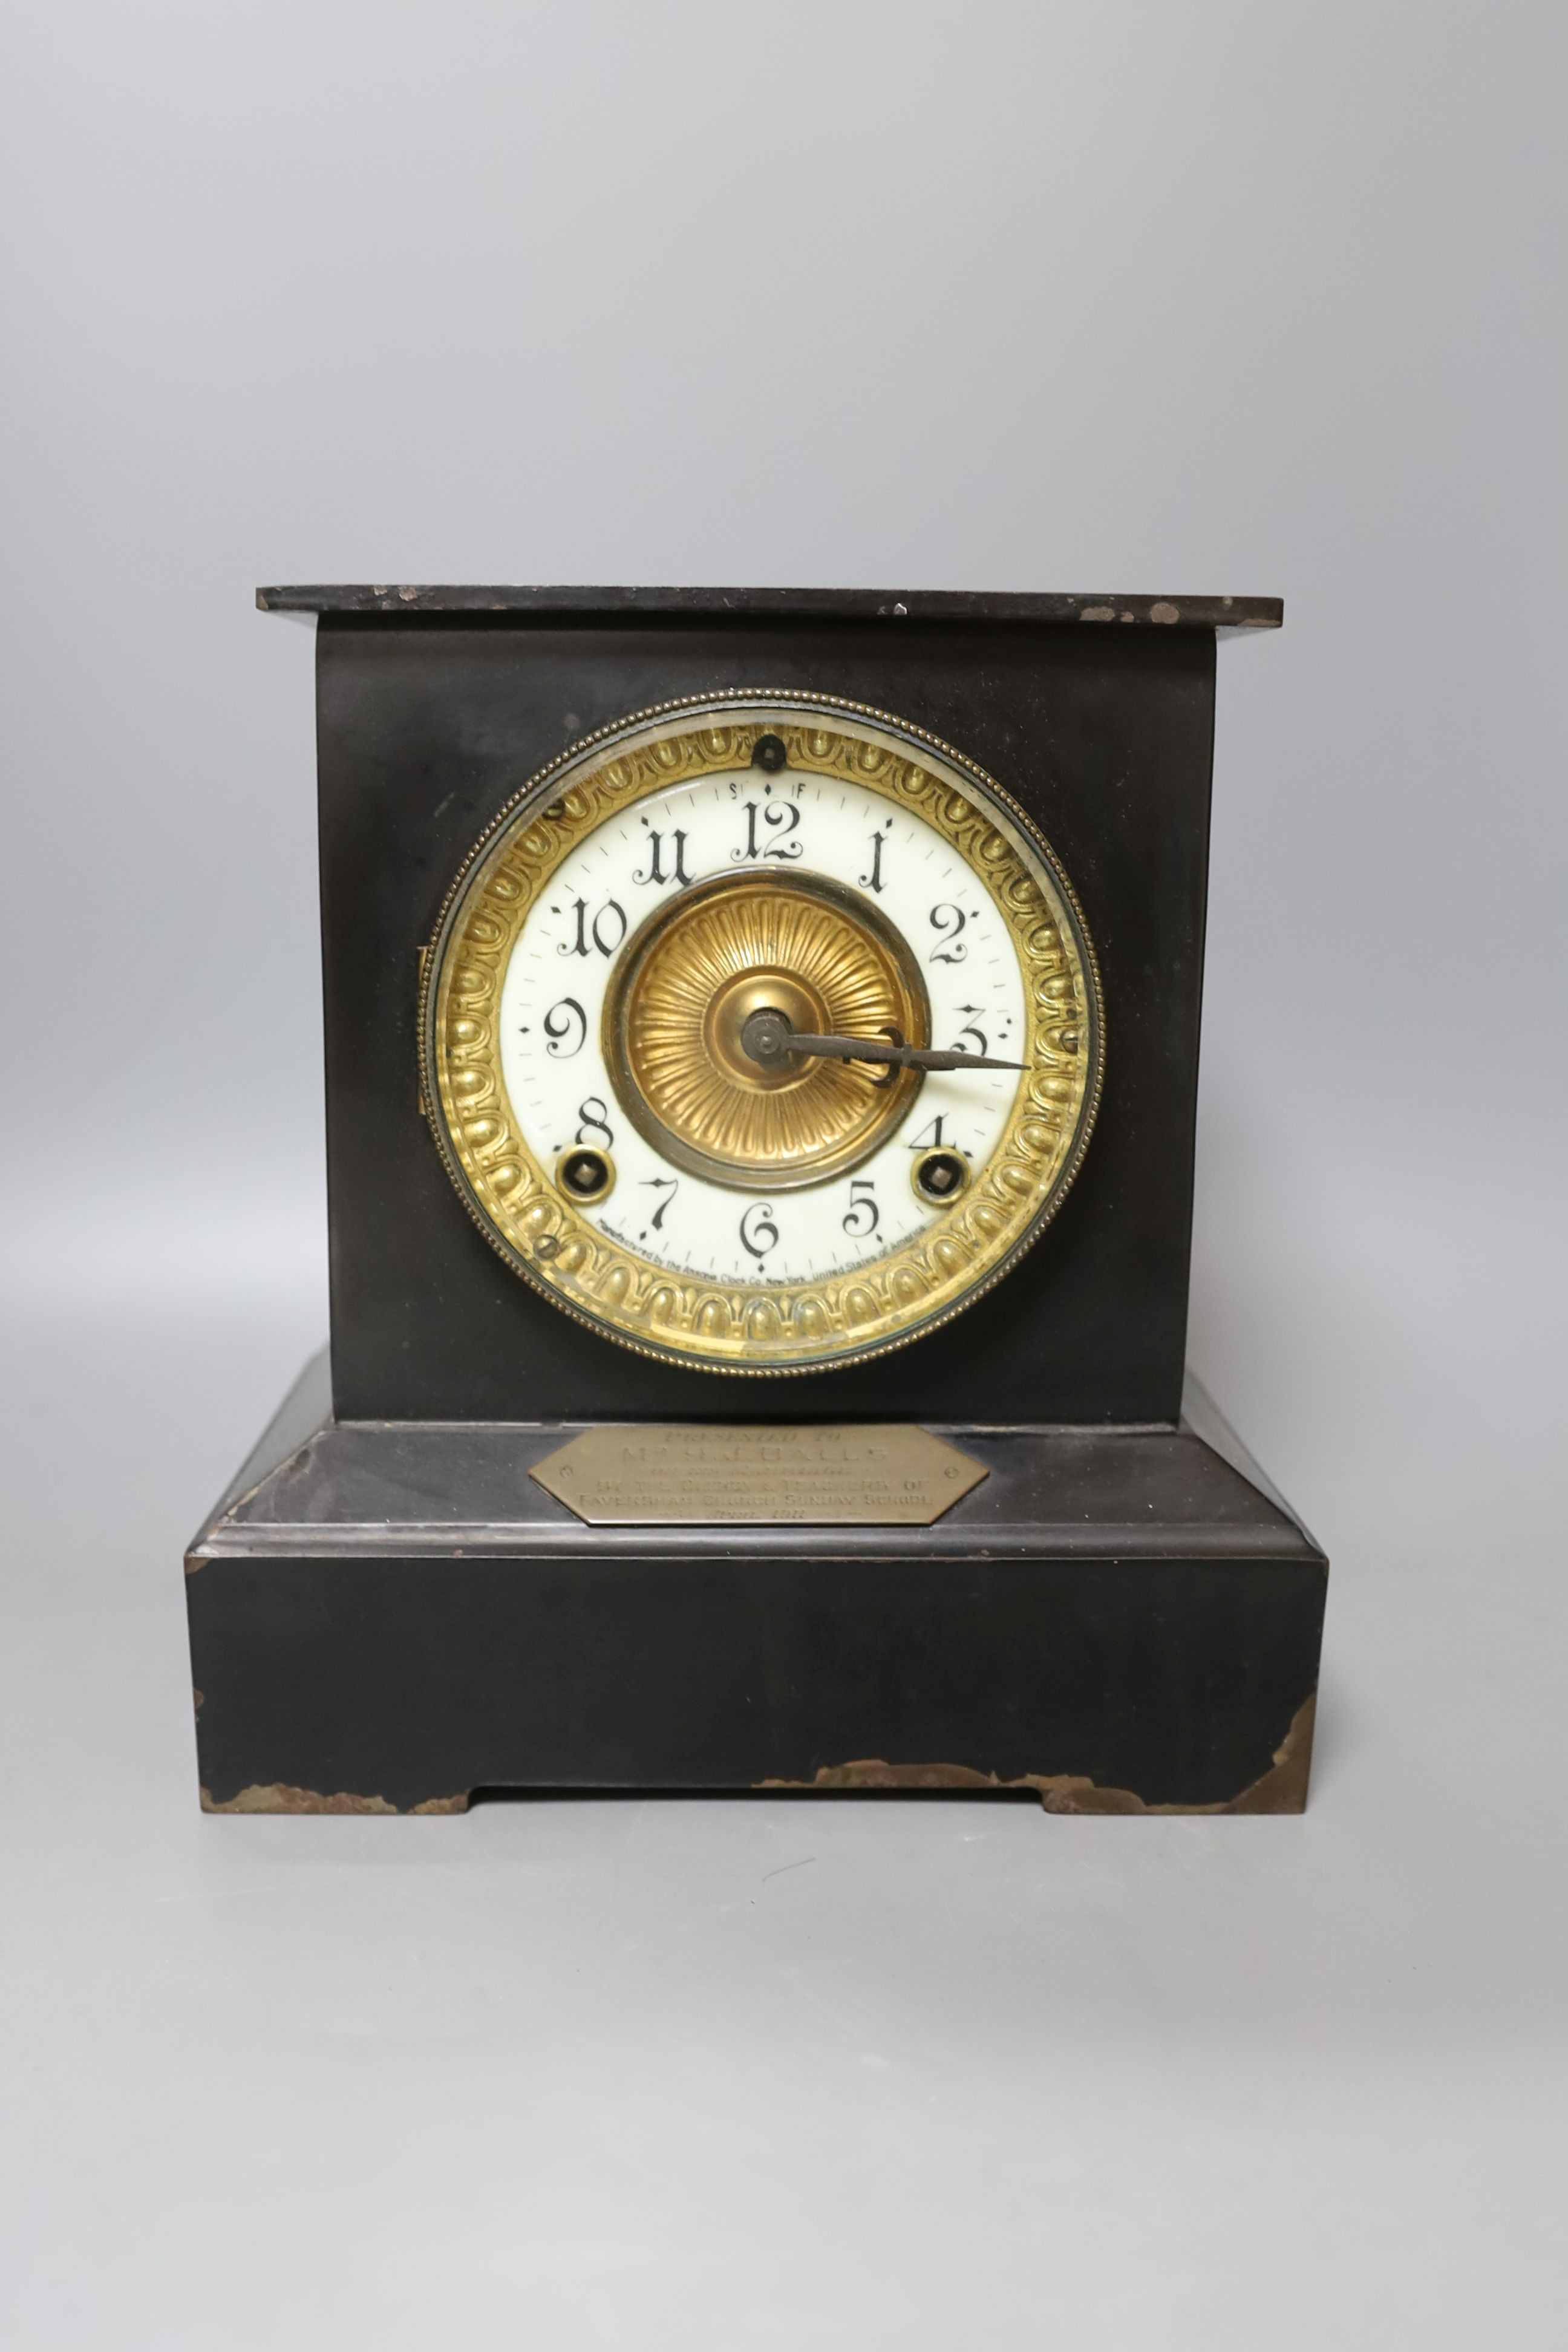 An Ansonia, New York, marriage mantel clock presented to ‘Mr H. J Halls’ dated 1911- 24cm tall